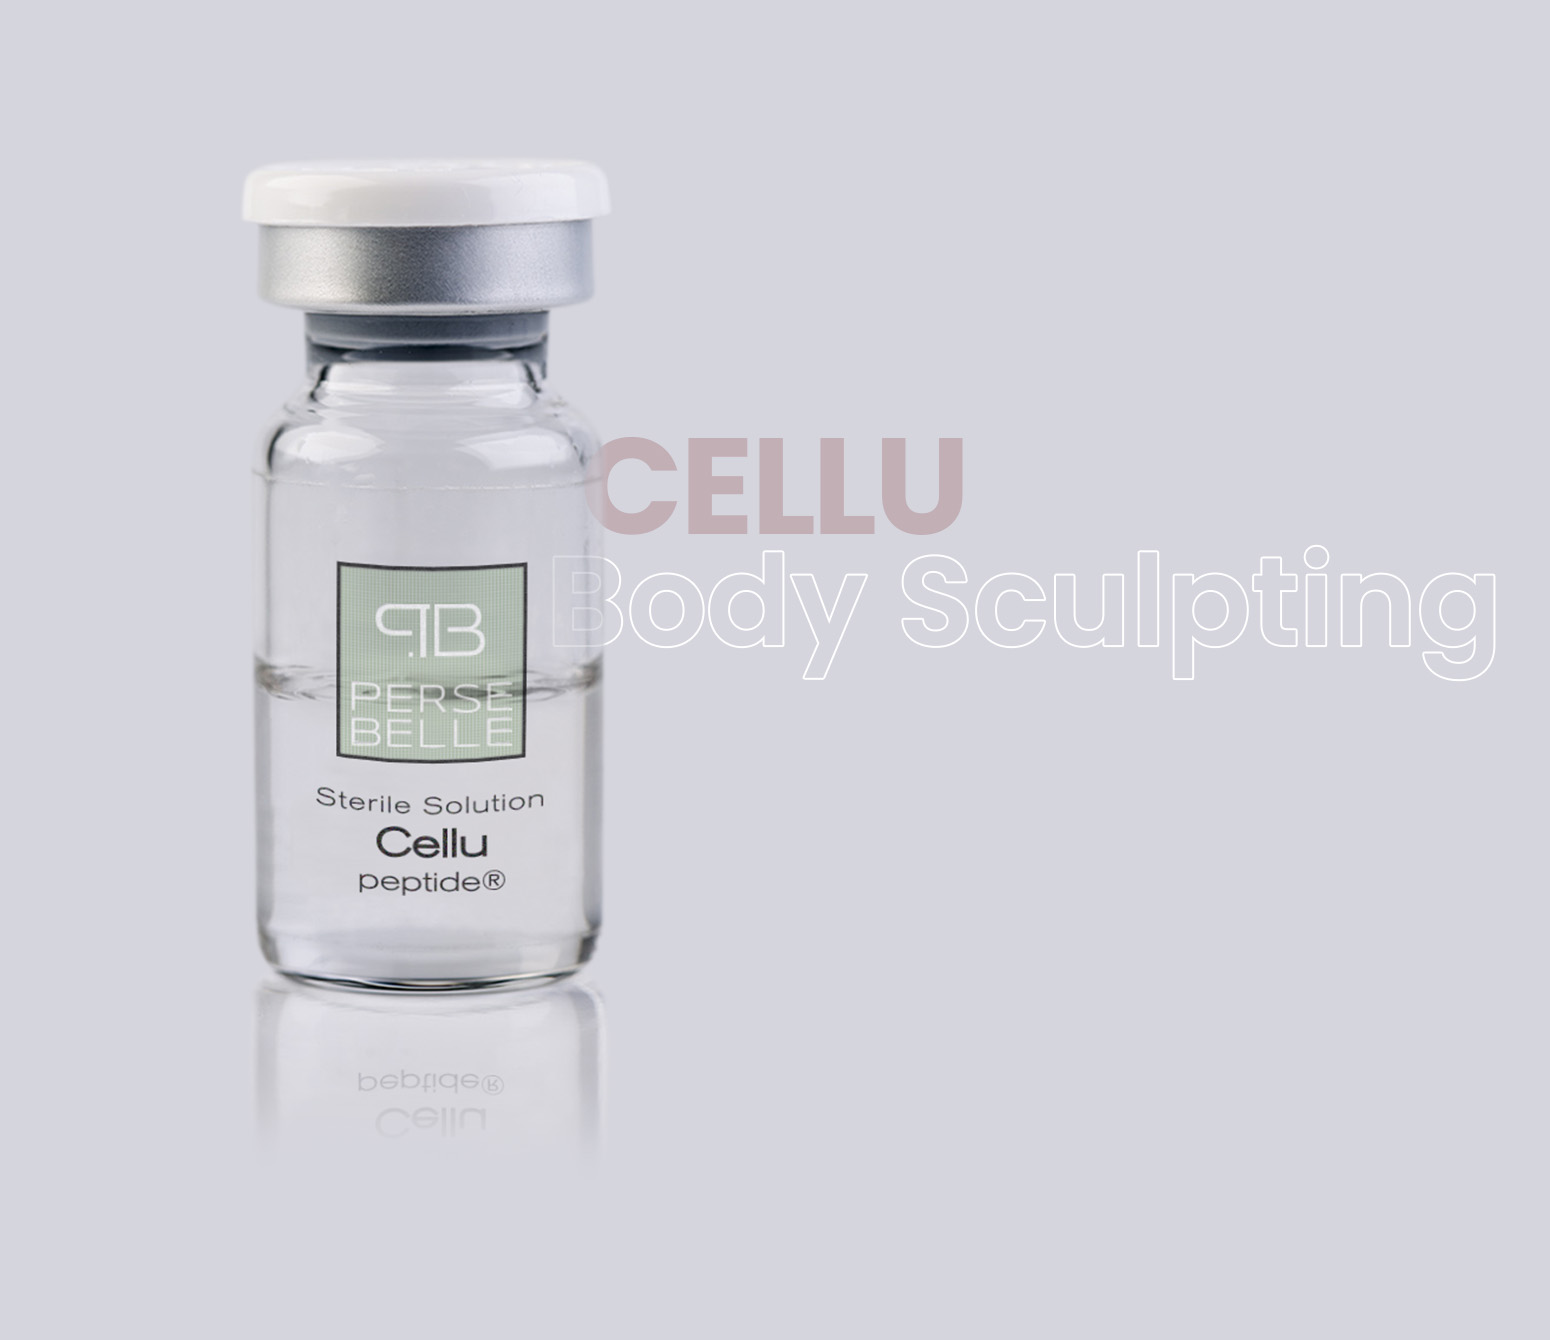 injection mesotherapy cellulite - products for professionals - Persebelle